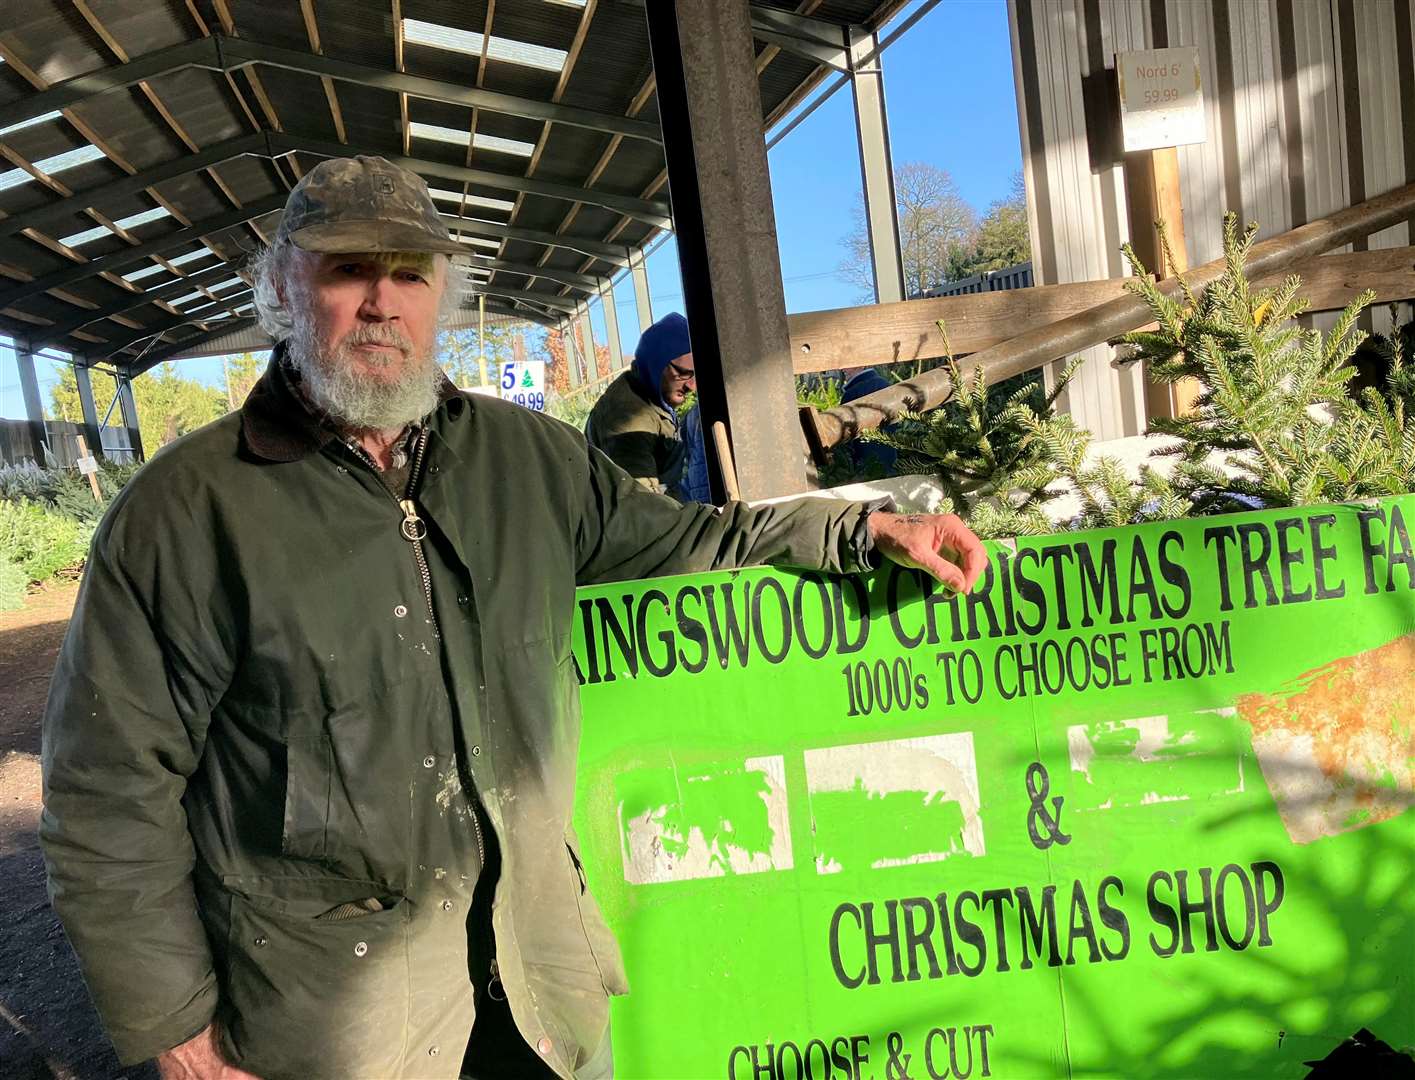 Rob Schroeder has been putting up roadside signs for his Kingswood Christmas Trees business for 40 years. Picture: Simon Finlay